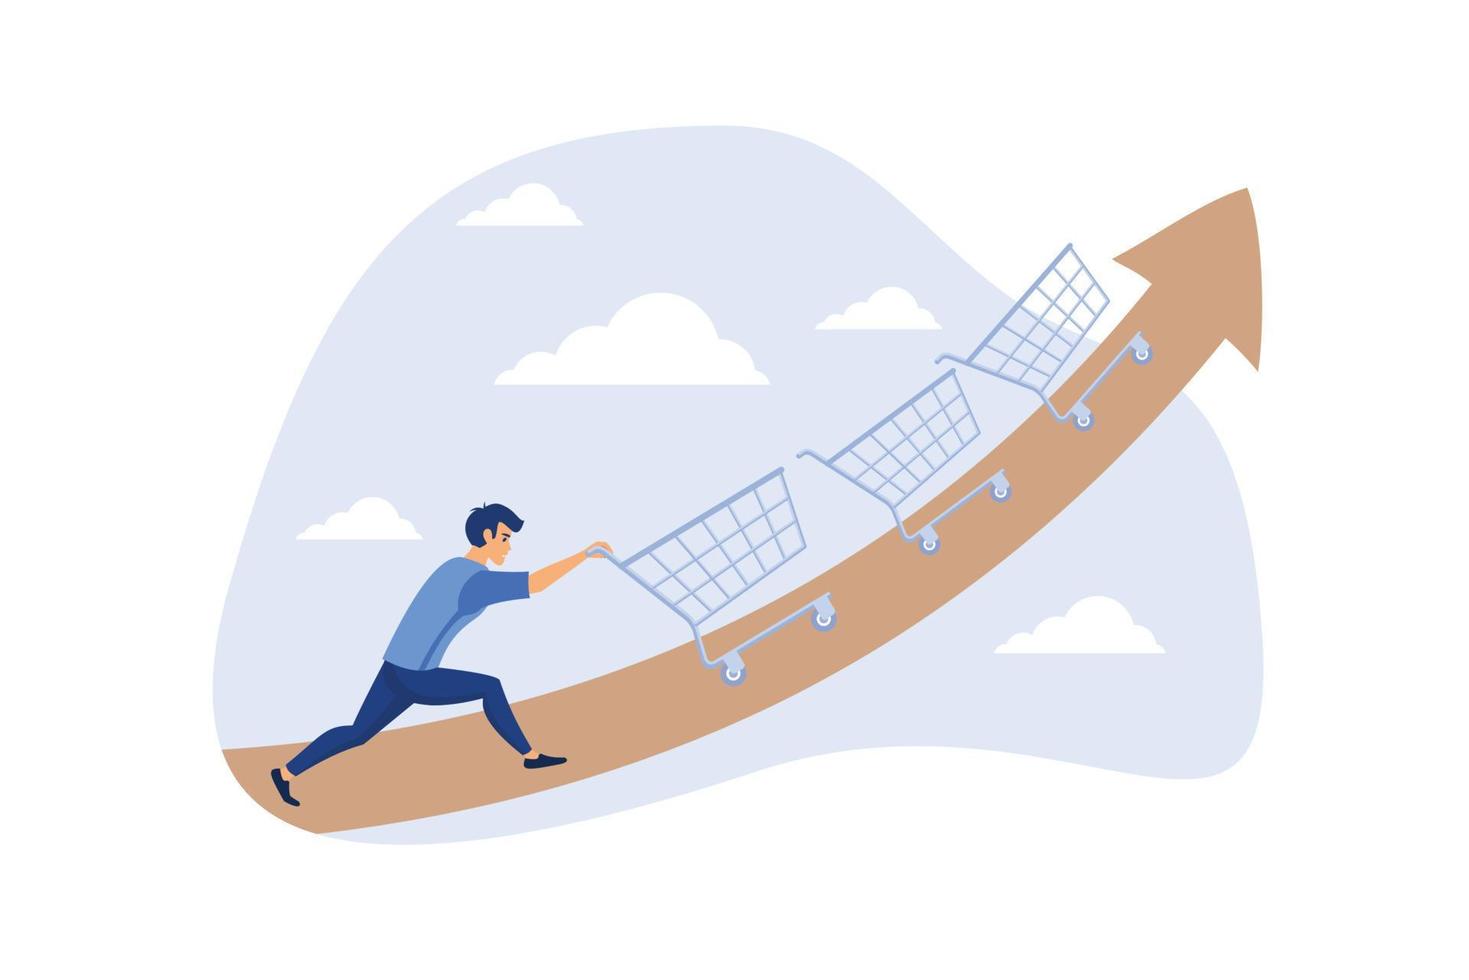 Increase sales or profit, purchasing power growth or consumer spending more money, marketing strategy concept, businessman sale manager push role of shopping cart trolley up rising arrow. vector